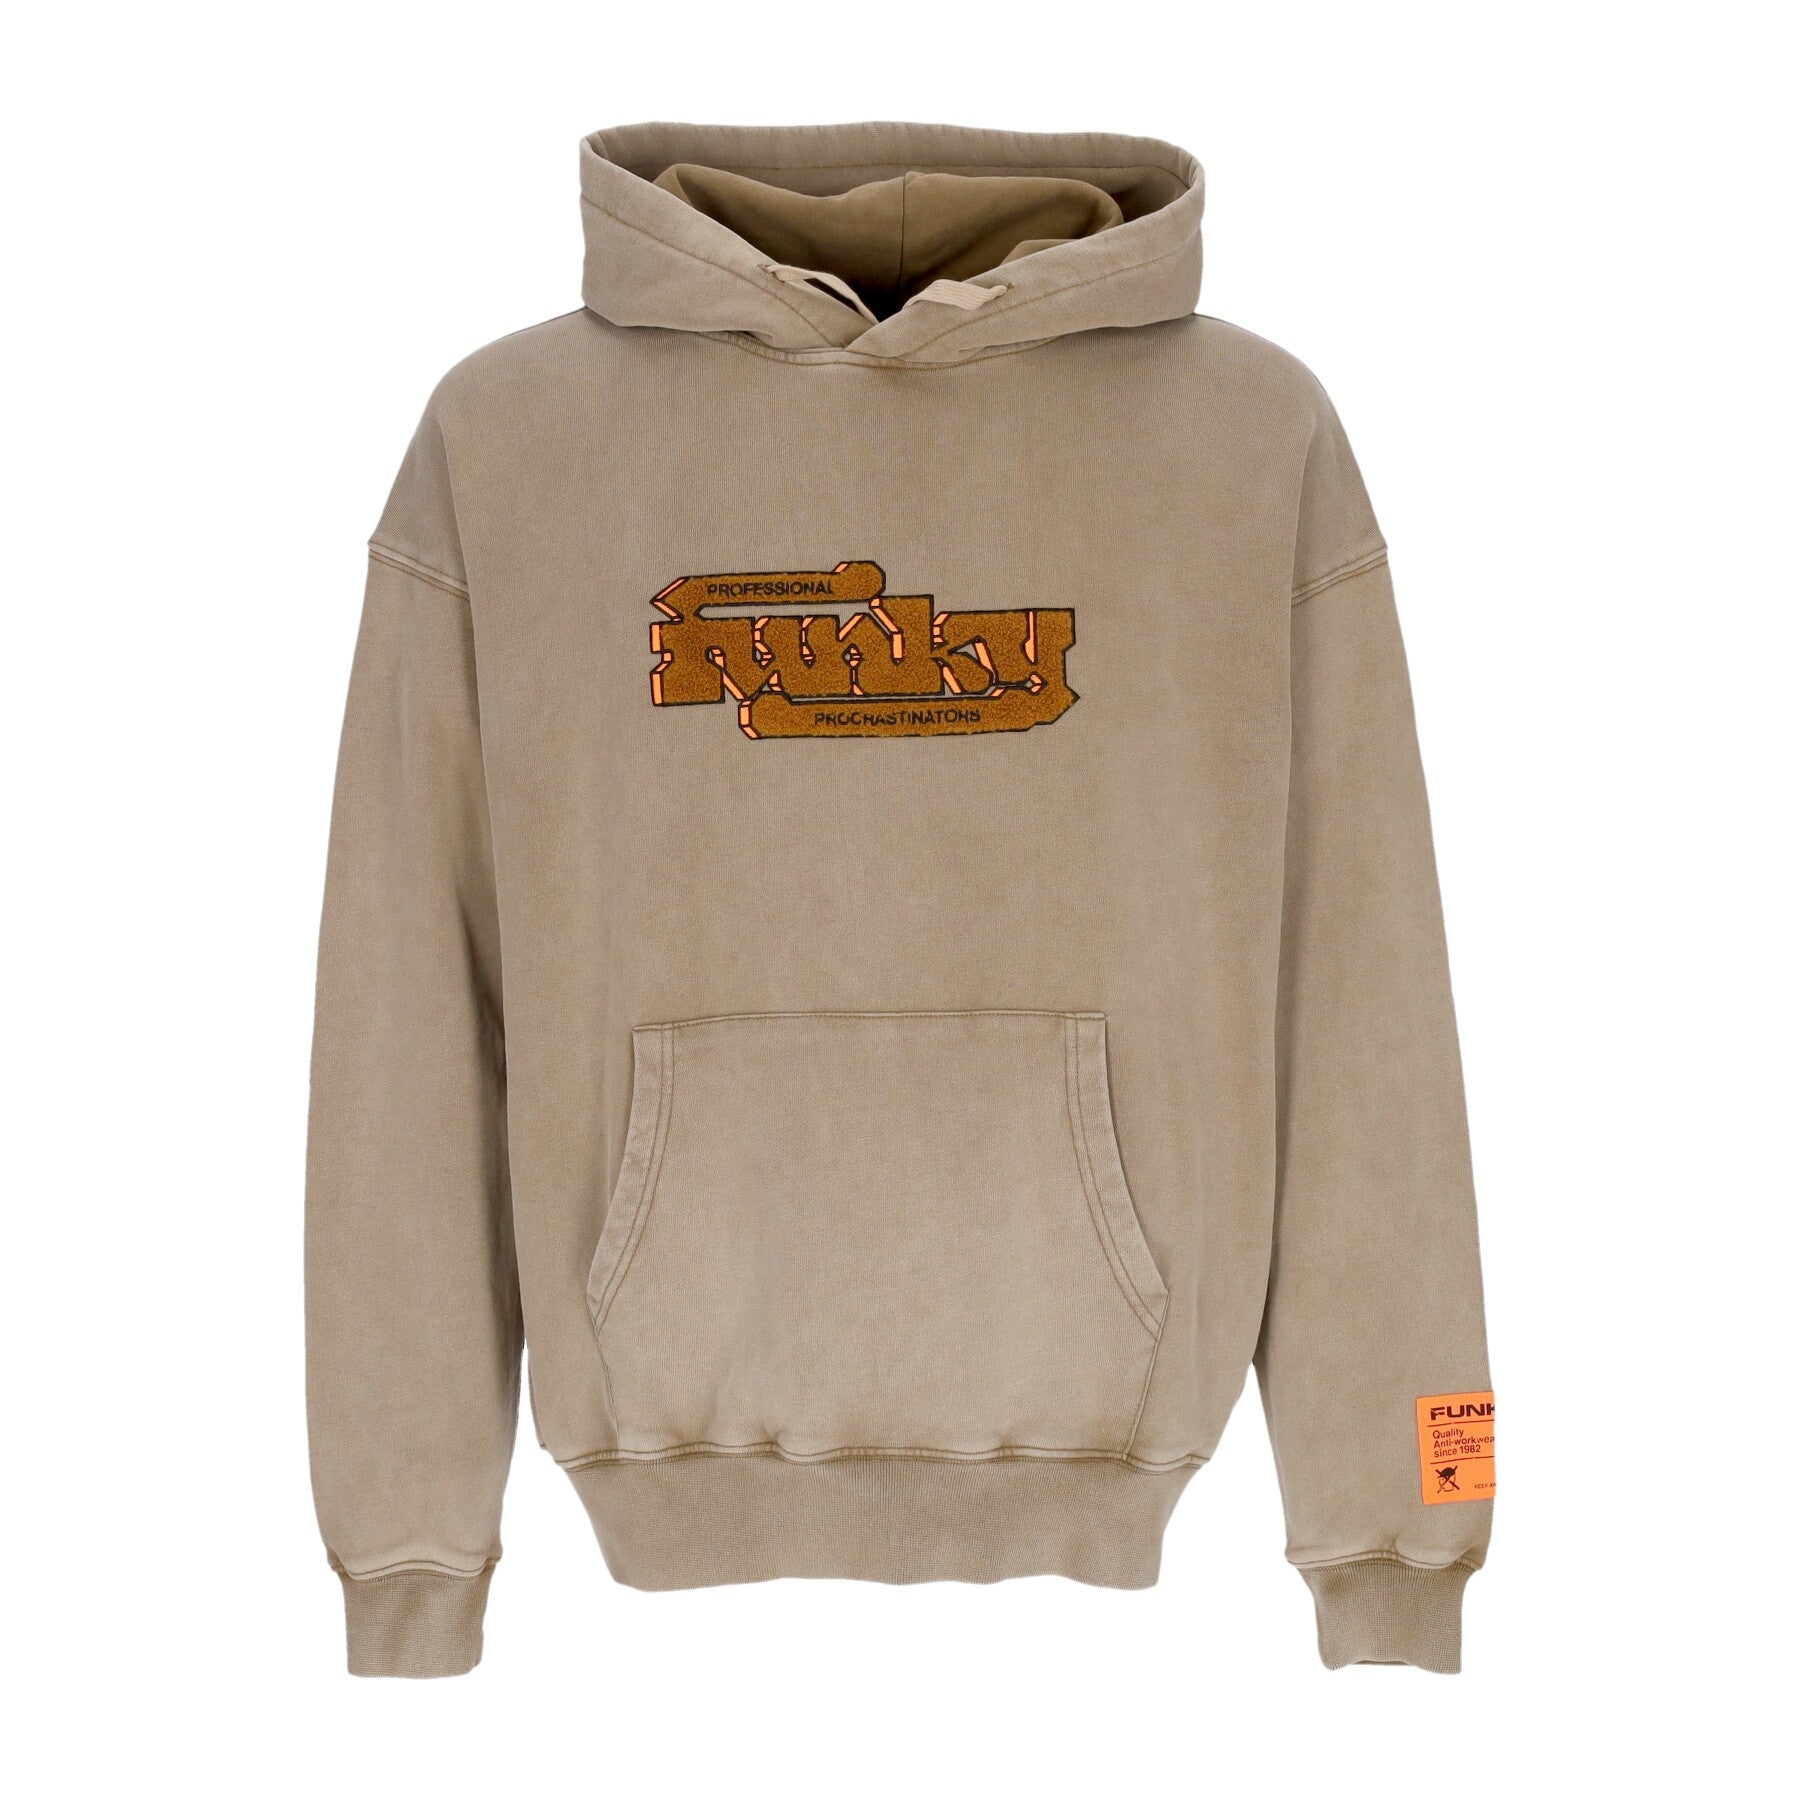 Propro Hoodie Sand Washed Out Men's Lightweight Hooded Sweatshirt